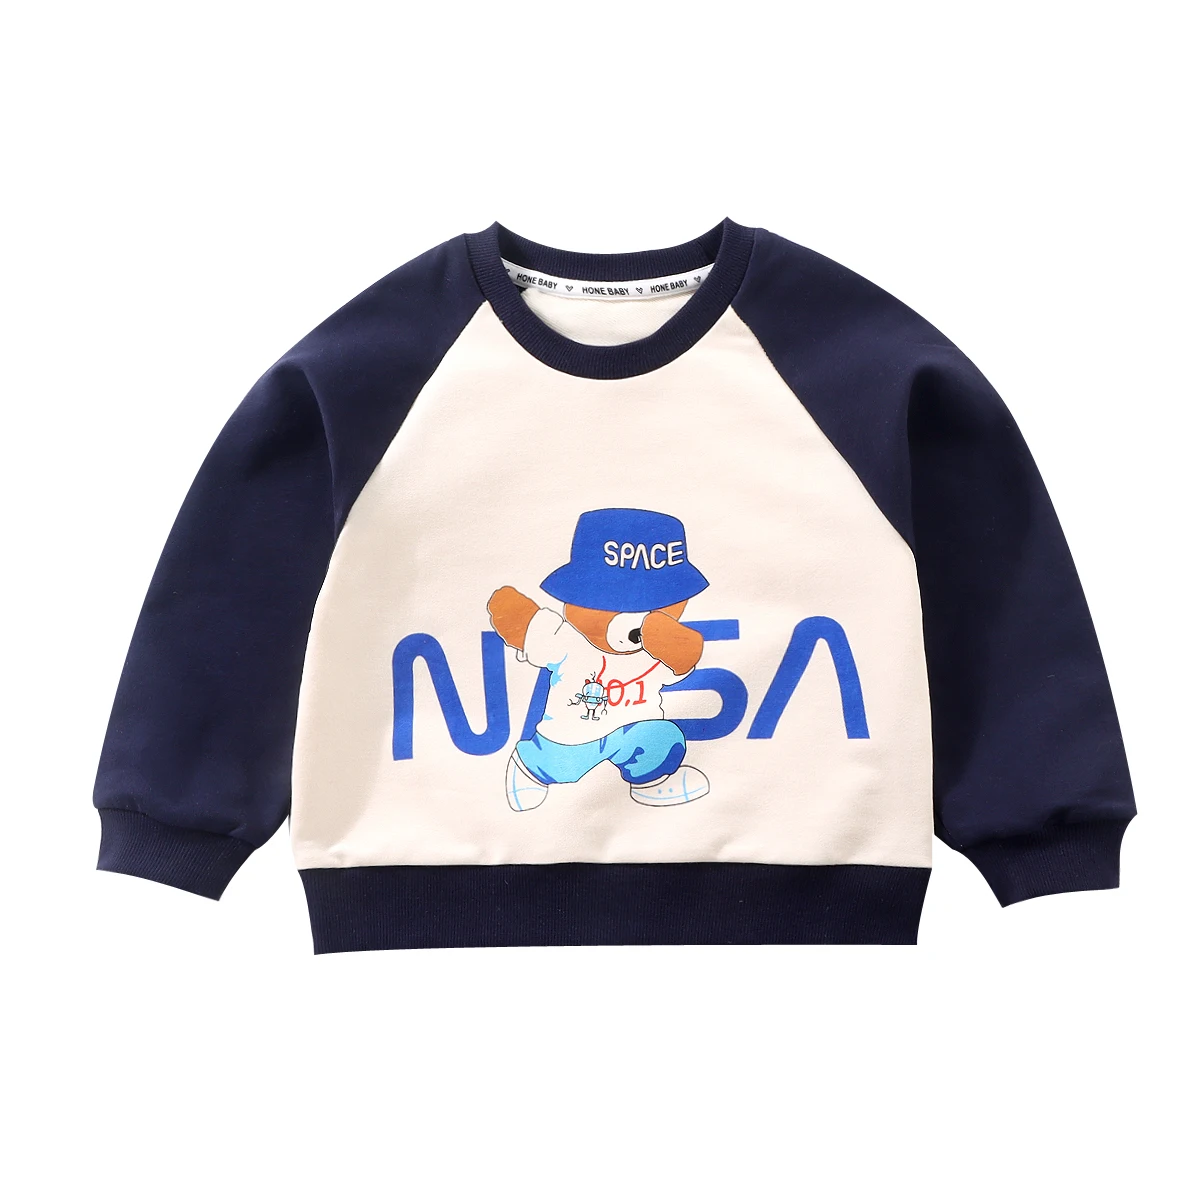 New Boys and girls casual, comfortable and breathable 1-7-year-old long-sleeved shaved T-shirt sweater long-sleeved.